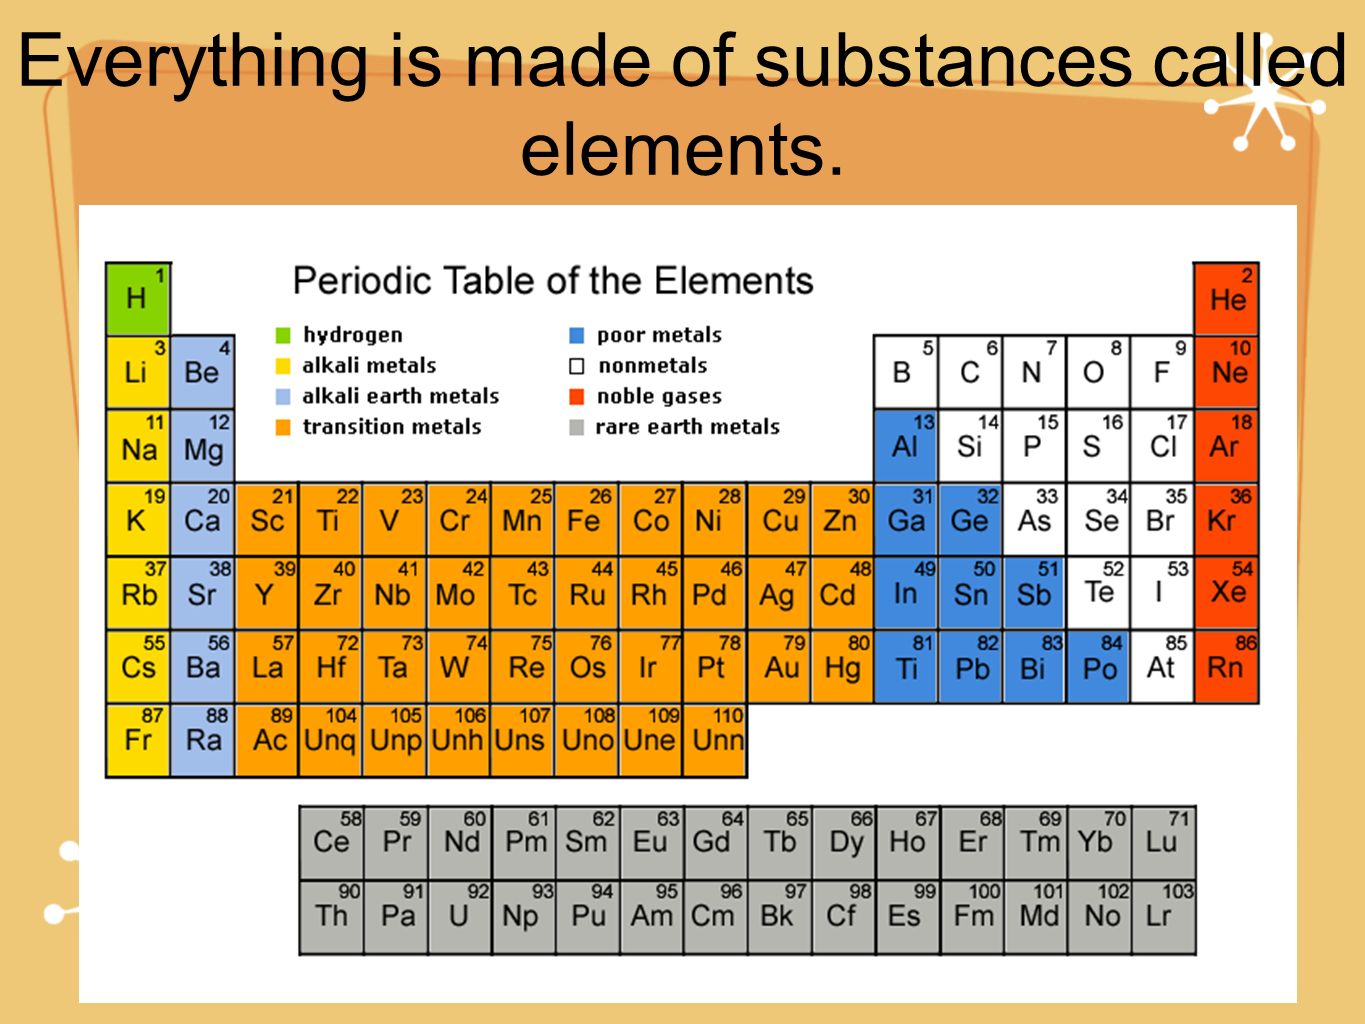 Everything is made of substances called elements.